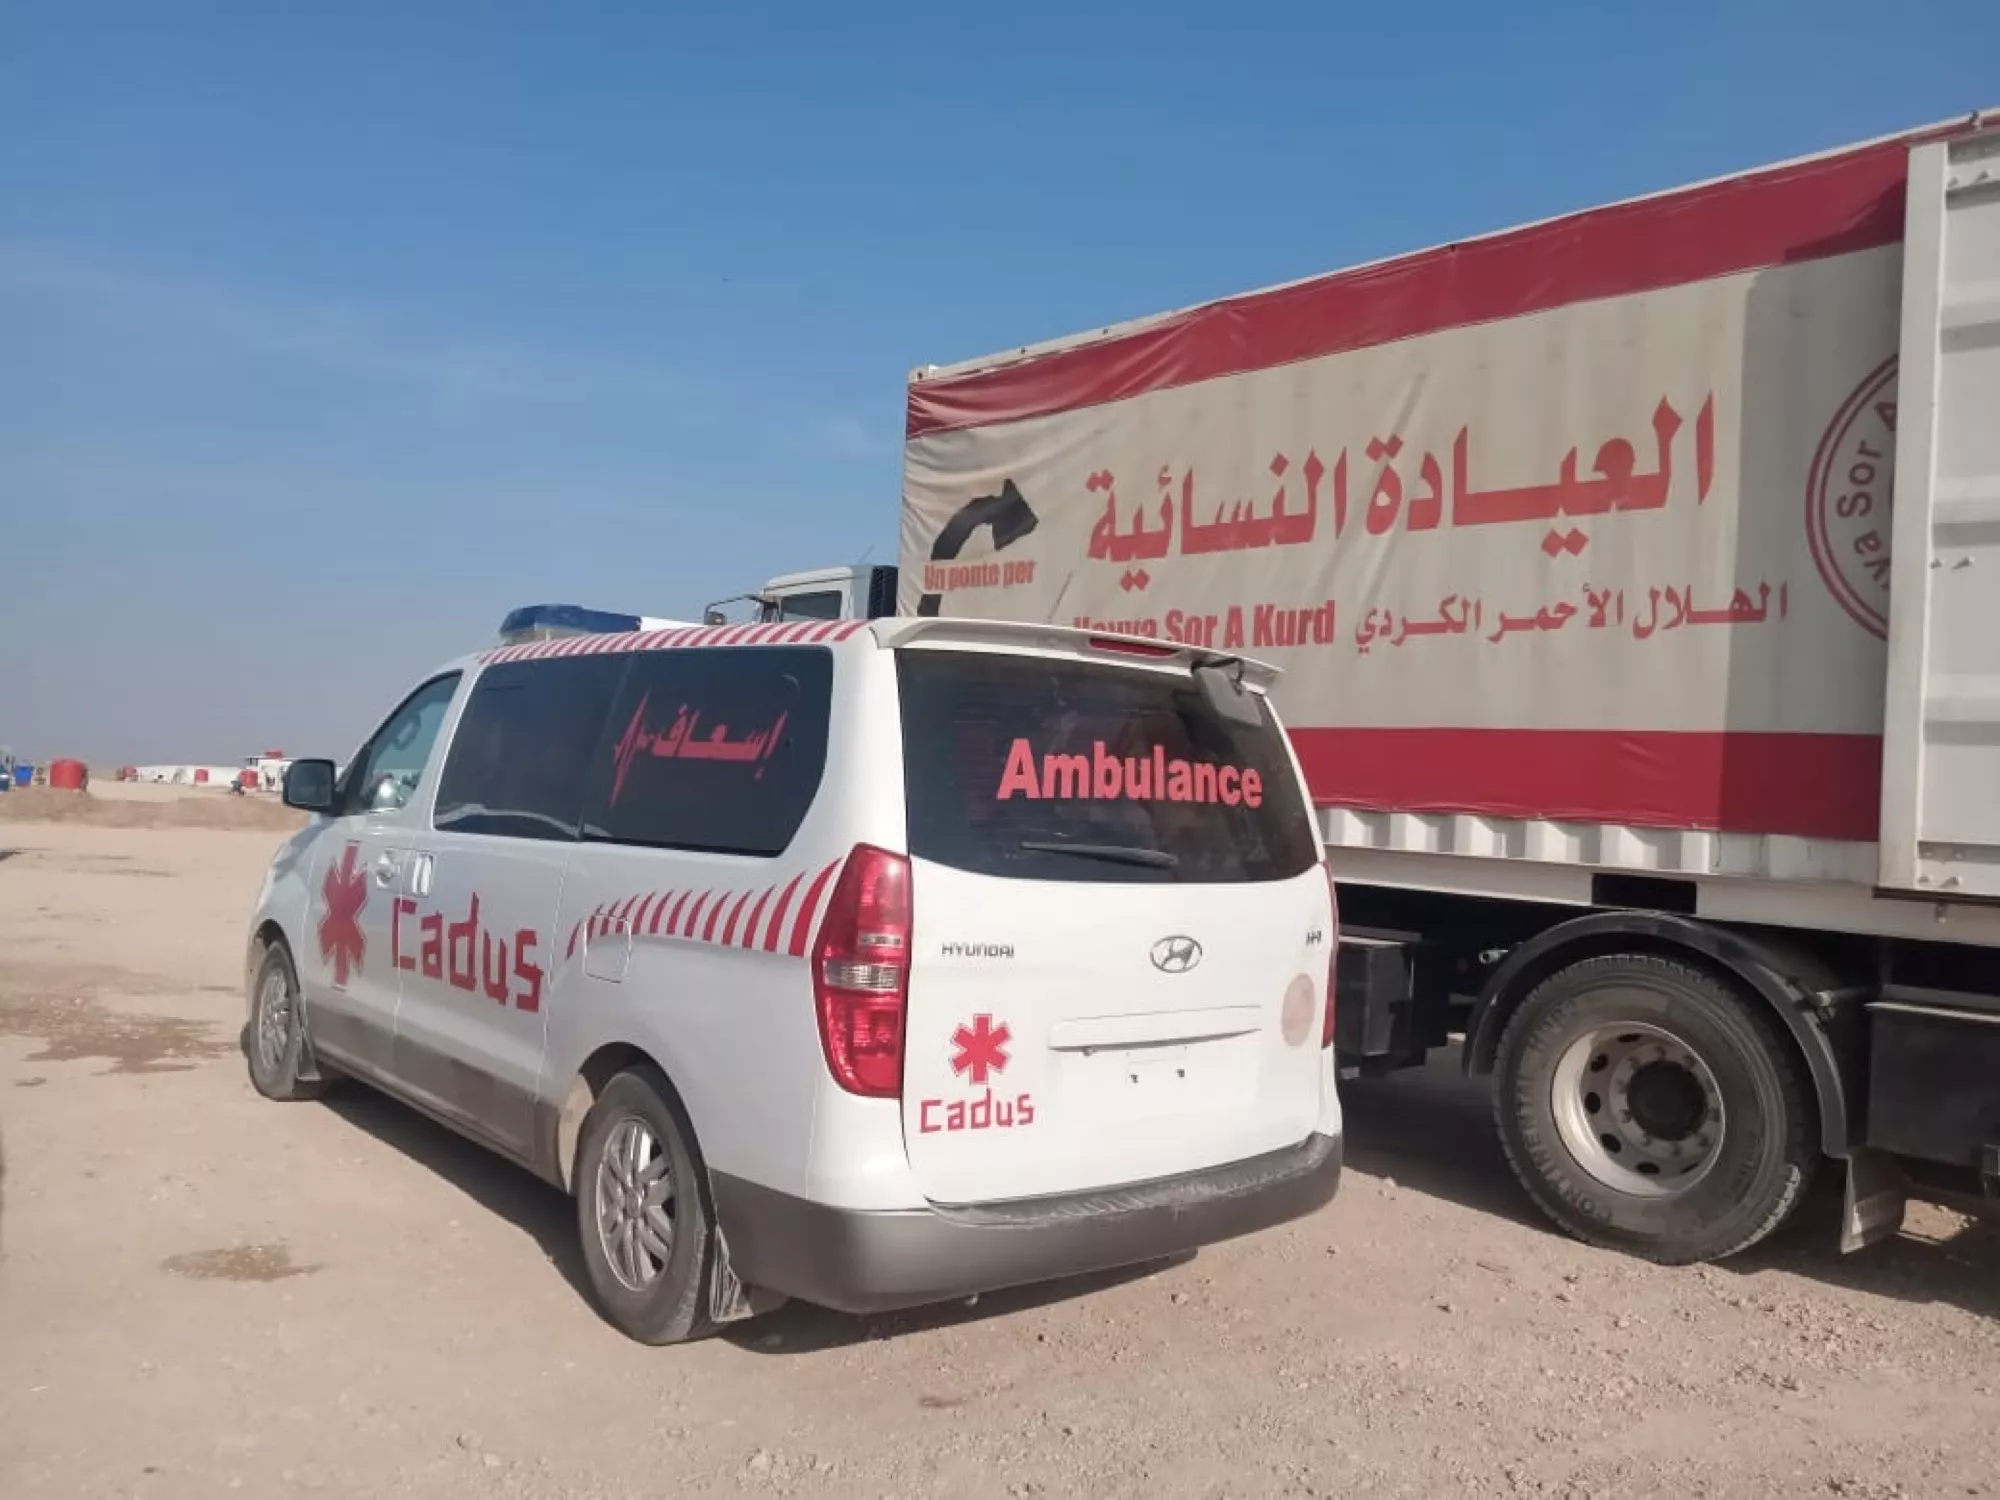 CADUS Ambulance in cooperation with KRC during Turkish attacks 2019